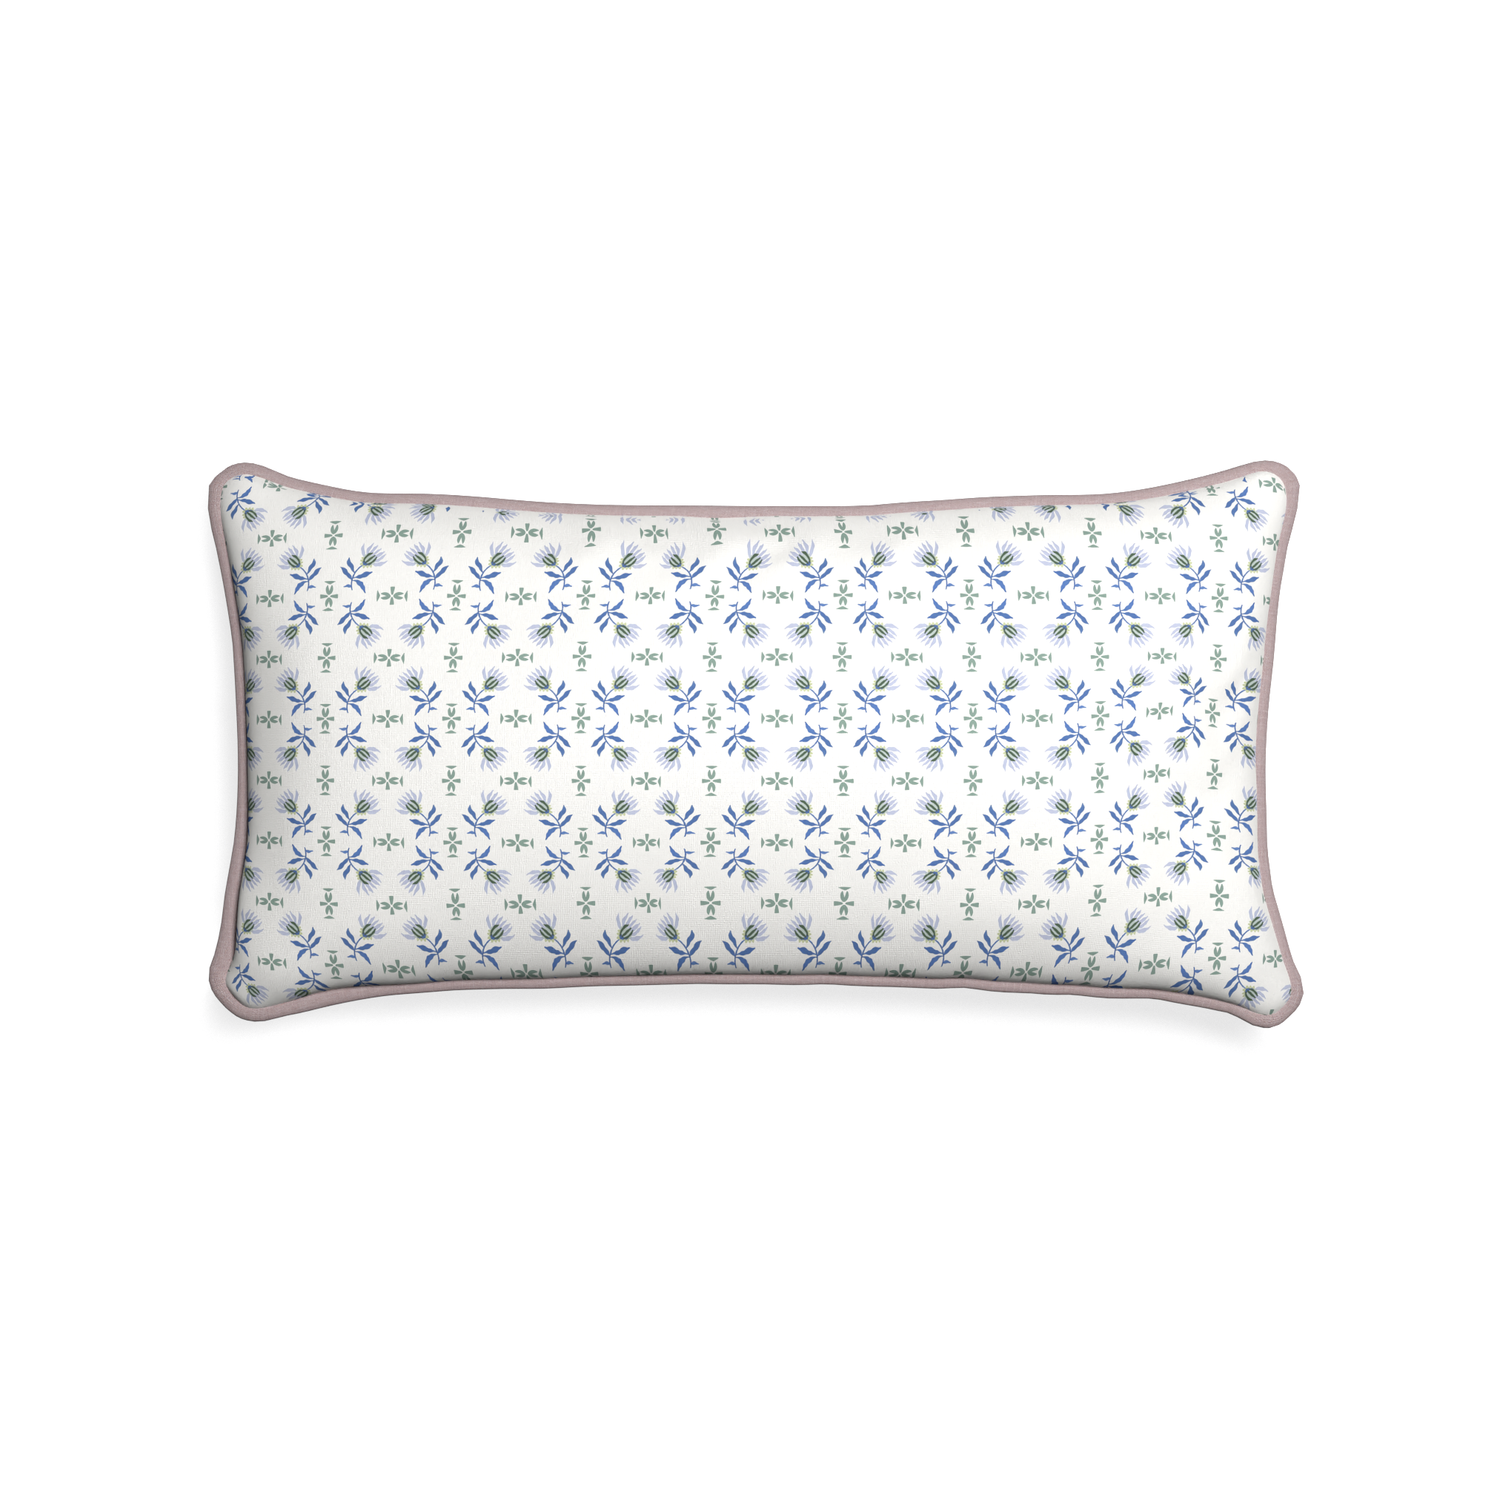 Midi-lumbar lee custom blue & green floralpillow with orchid piping on white background